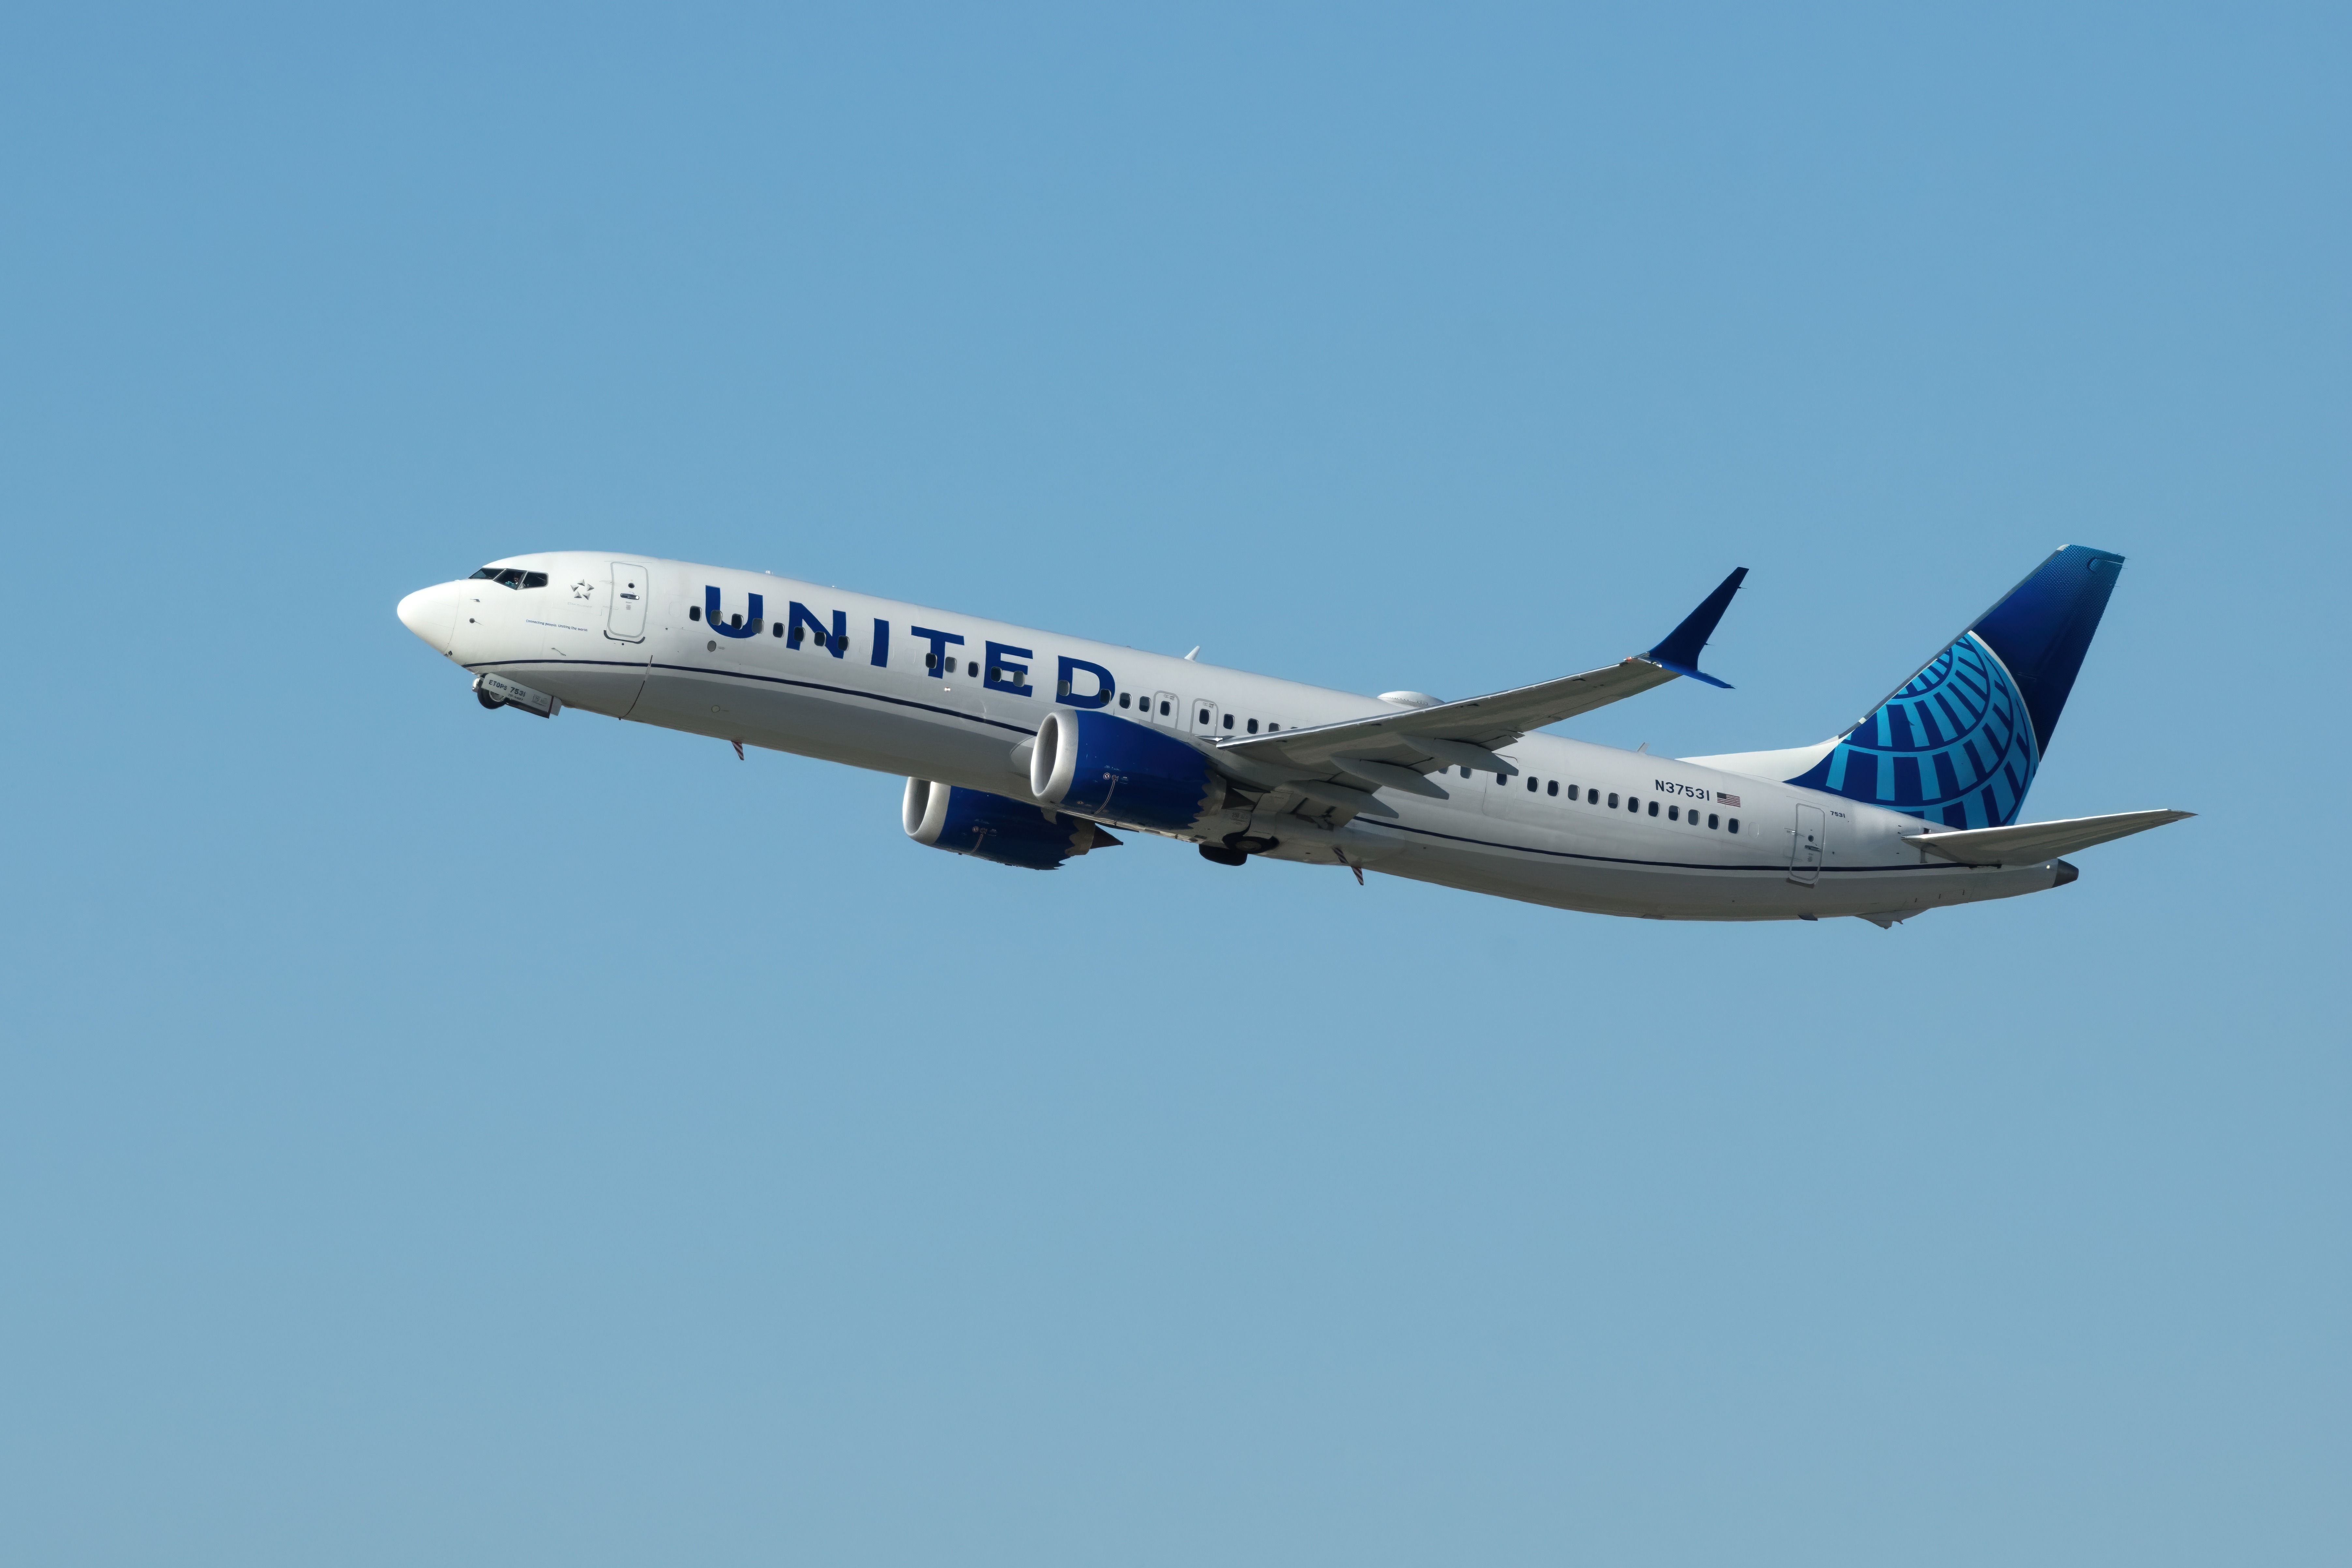 A United Airlines Boeing 737 flying in the sky.